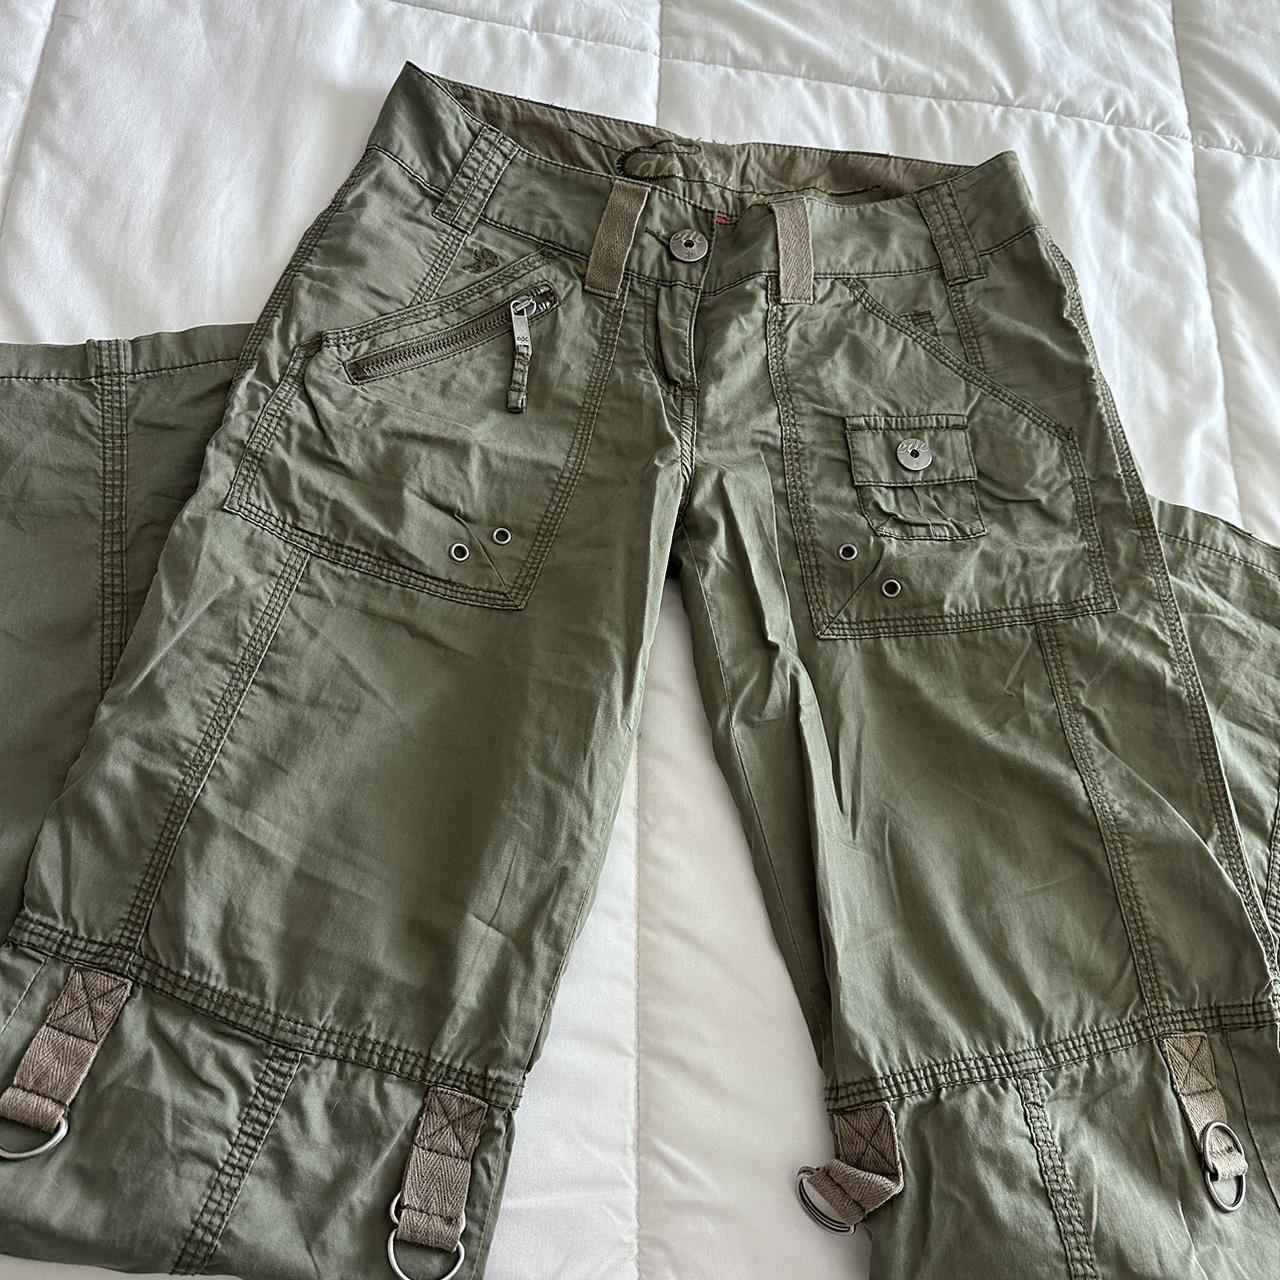 Womens Cargo Pants Recommendations Im on the search for goodquality cargo  pants not the thin ones with lots of pockets I can only fit in womens  sizing waist 24 inch and would